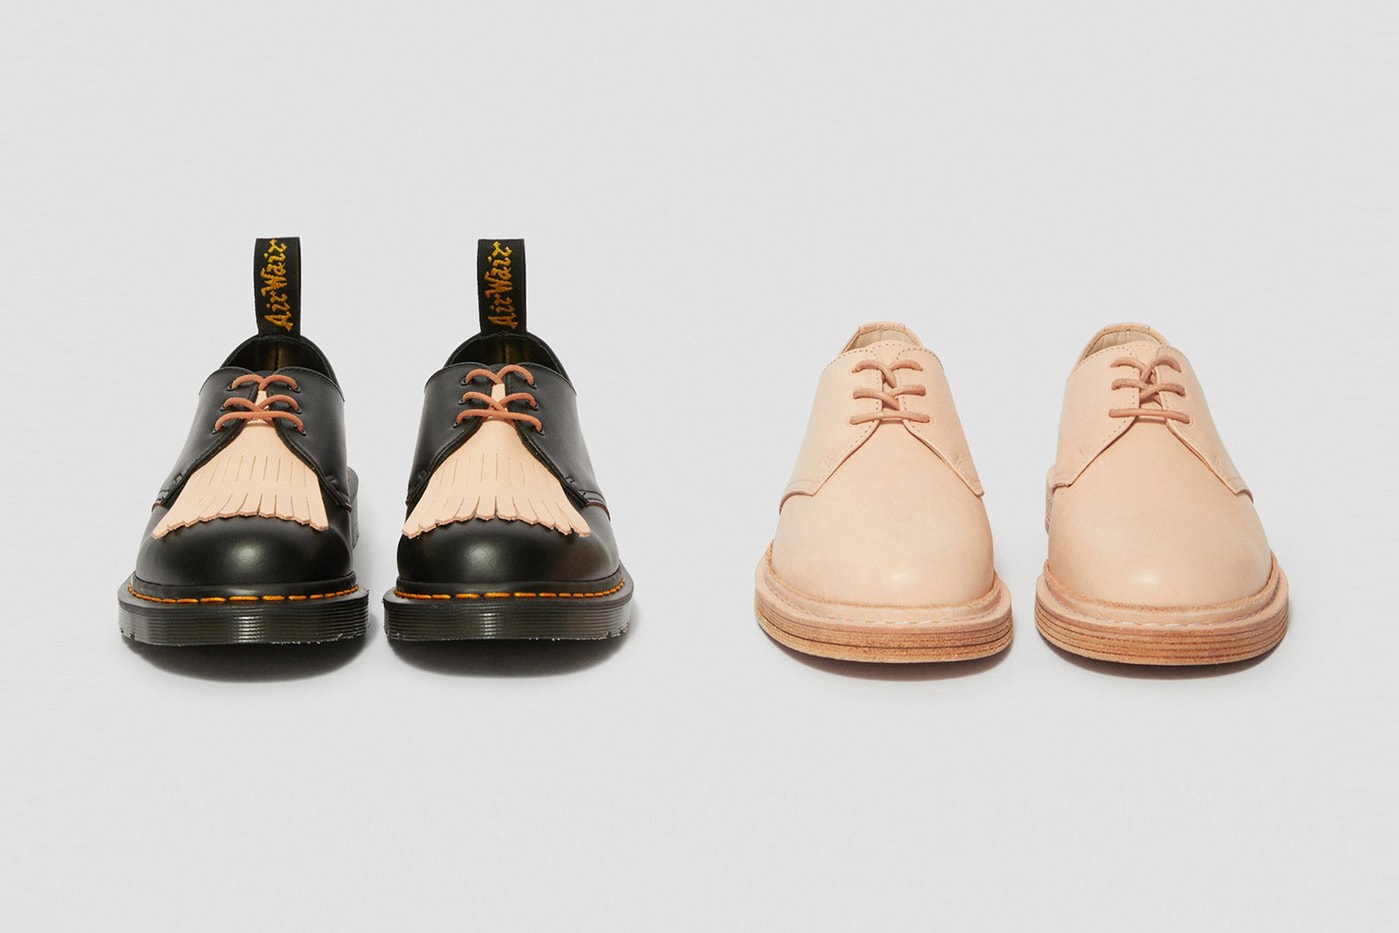 Hender Scheme x Dr. Martens 1461 Collaboration Shoes Manual Industrial Products 21 release date info buy colorway drop japan september 10 28 2019 pre order web store site